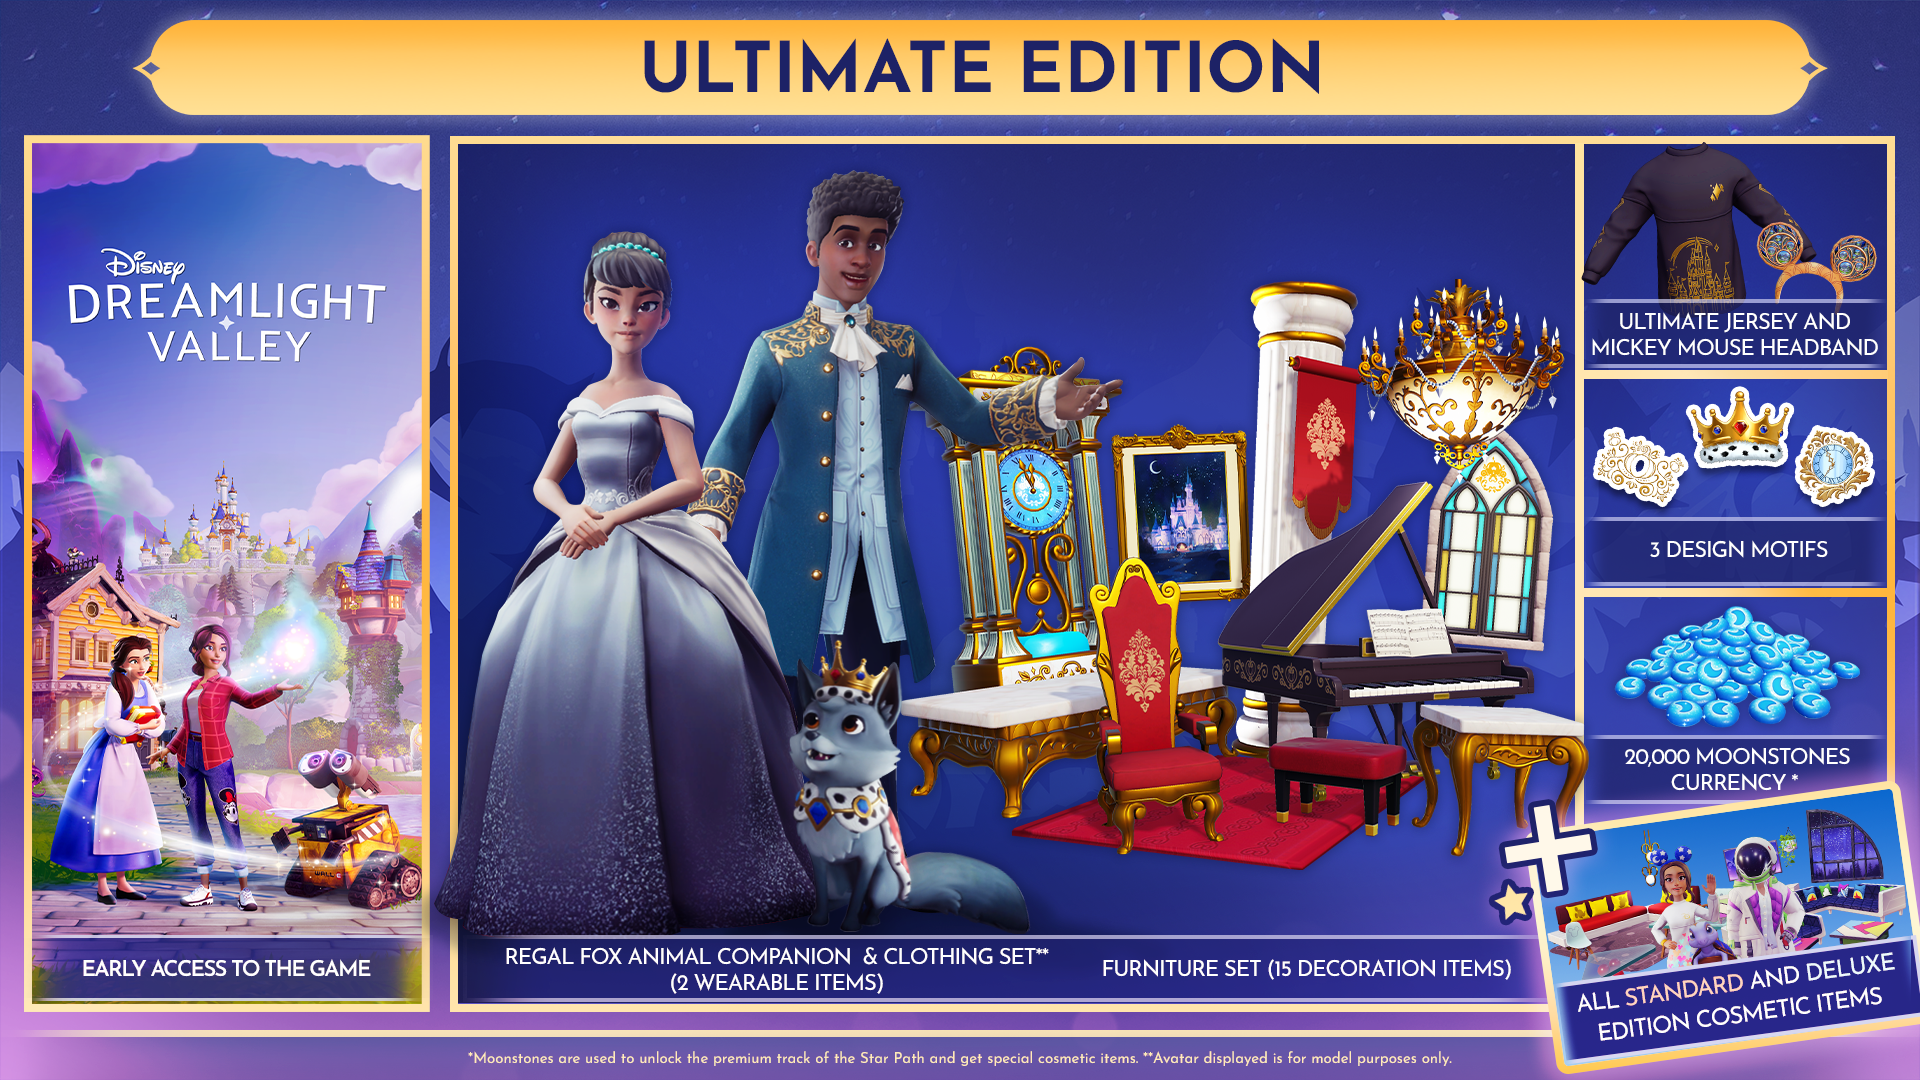 Disney Dreamlight Valley's Ultimate Edition Founder's Pack includes all cosmetic items from the Standard and Deluxe Editions.